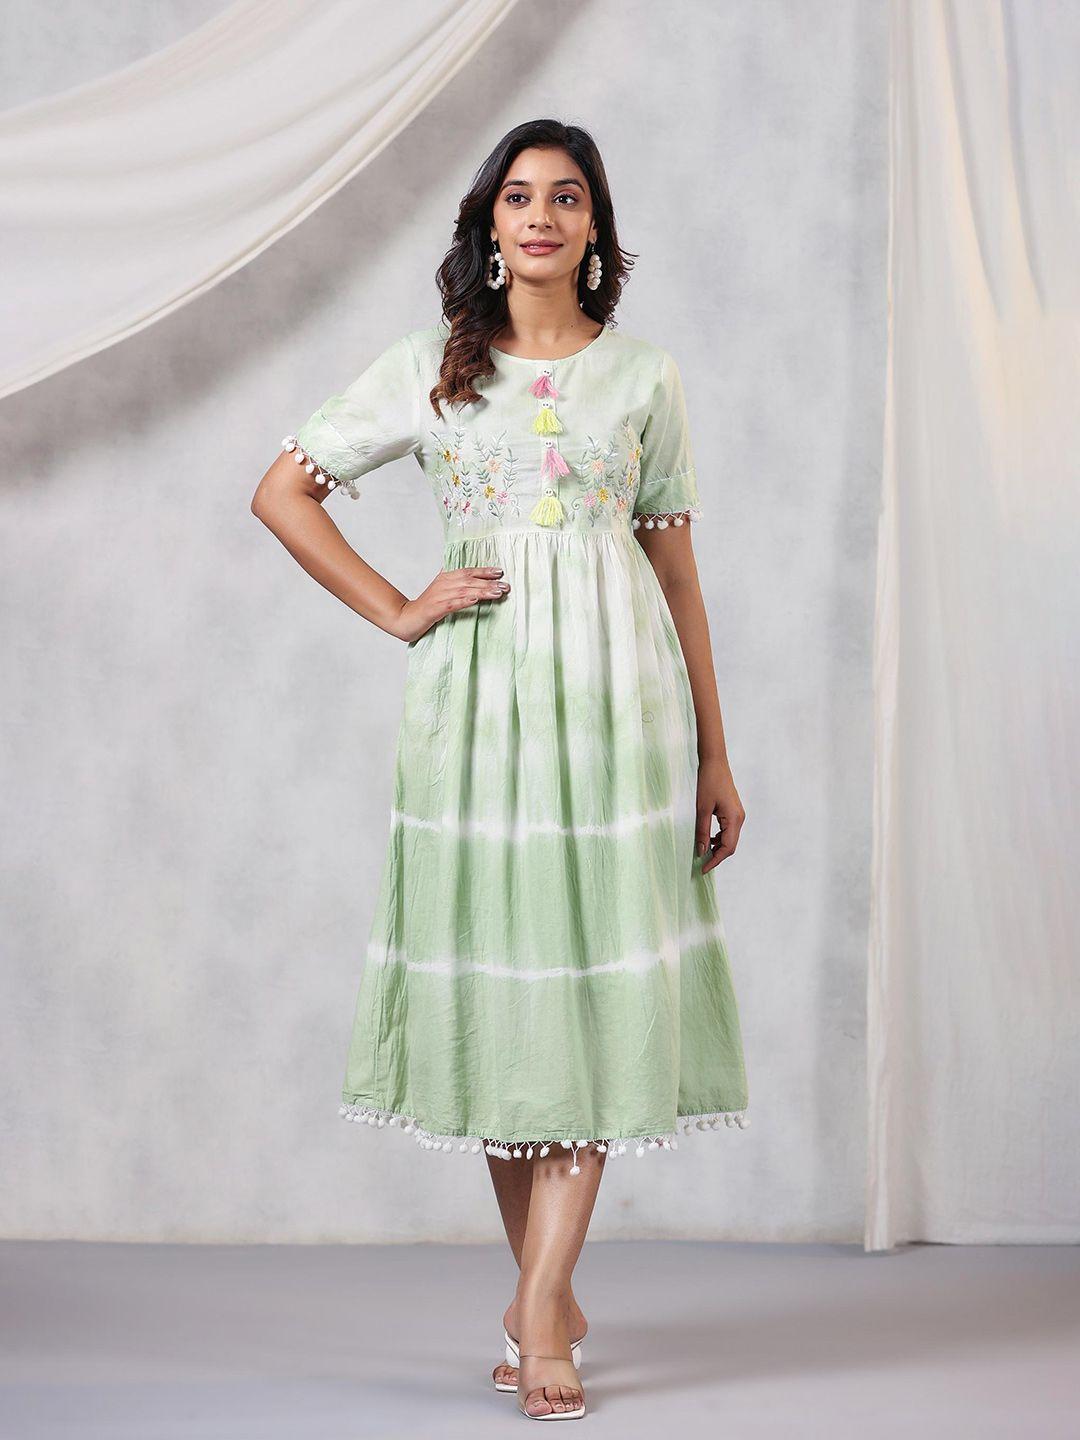 amirah s green tie and dye embroidered fit & flare dress